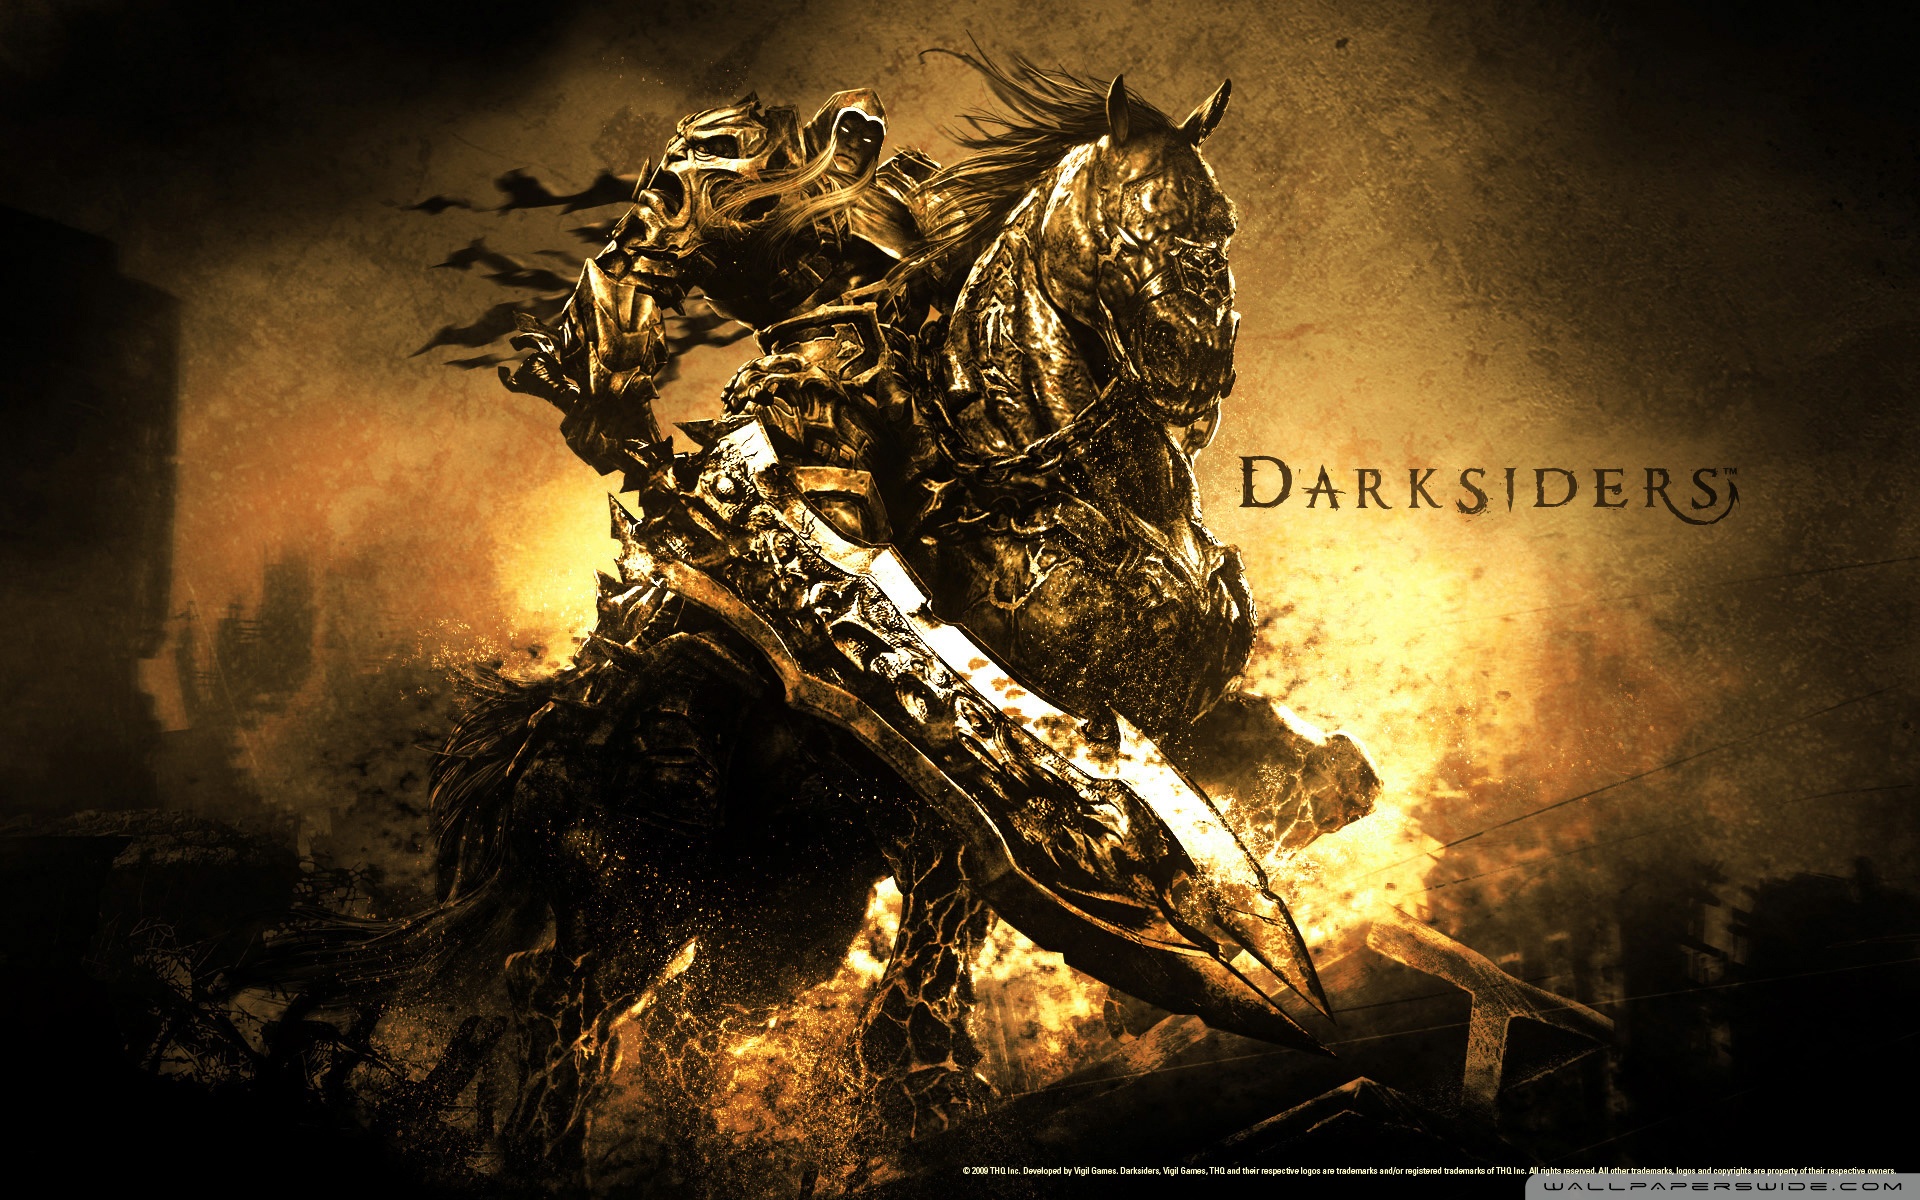 Darksiders Backgrounds, Compatible - PC, Mobile, Gadgets| 1920x1200 px